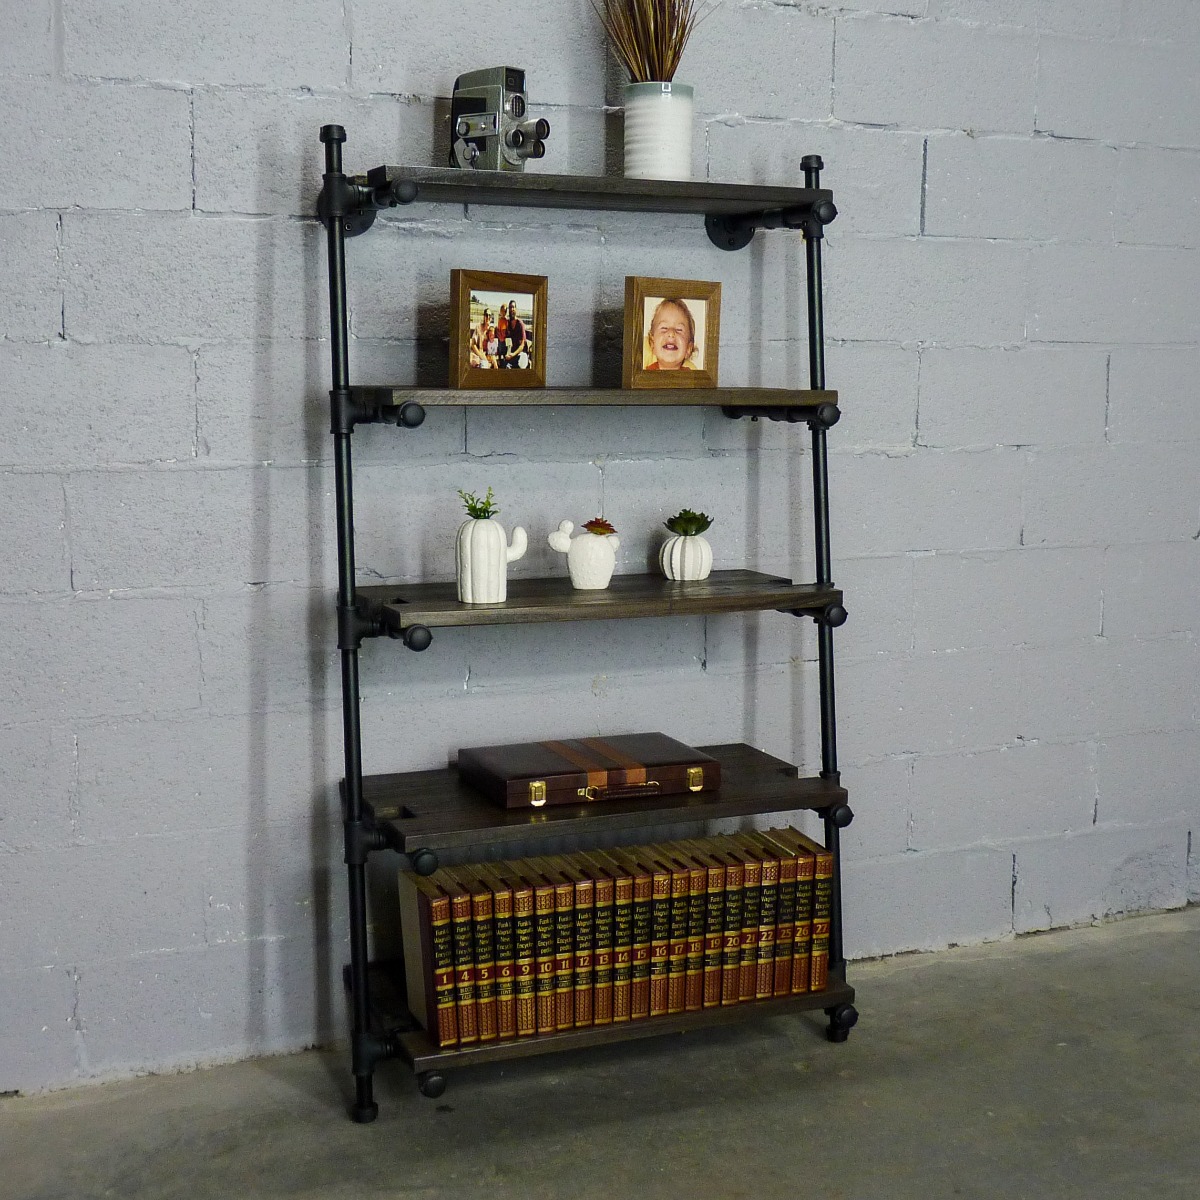 Twls1-bl-bl-bl 35 In. Orlando Farmhouse Industrial Leaning Bookcase, Black Steel Combo With Dark Brown Stained Wood